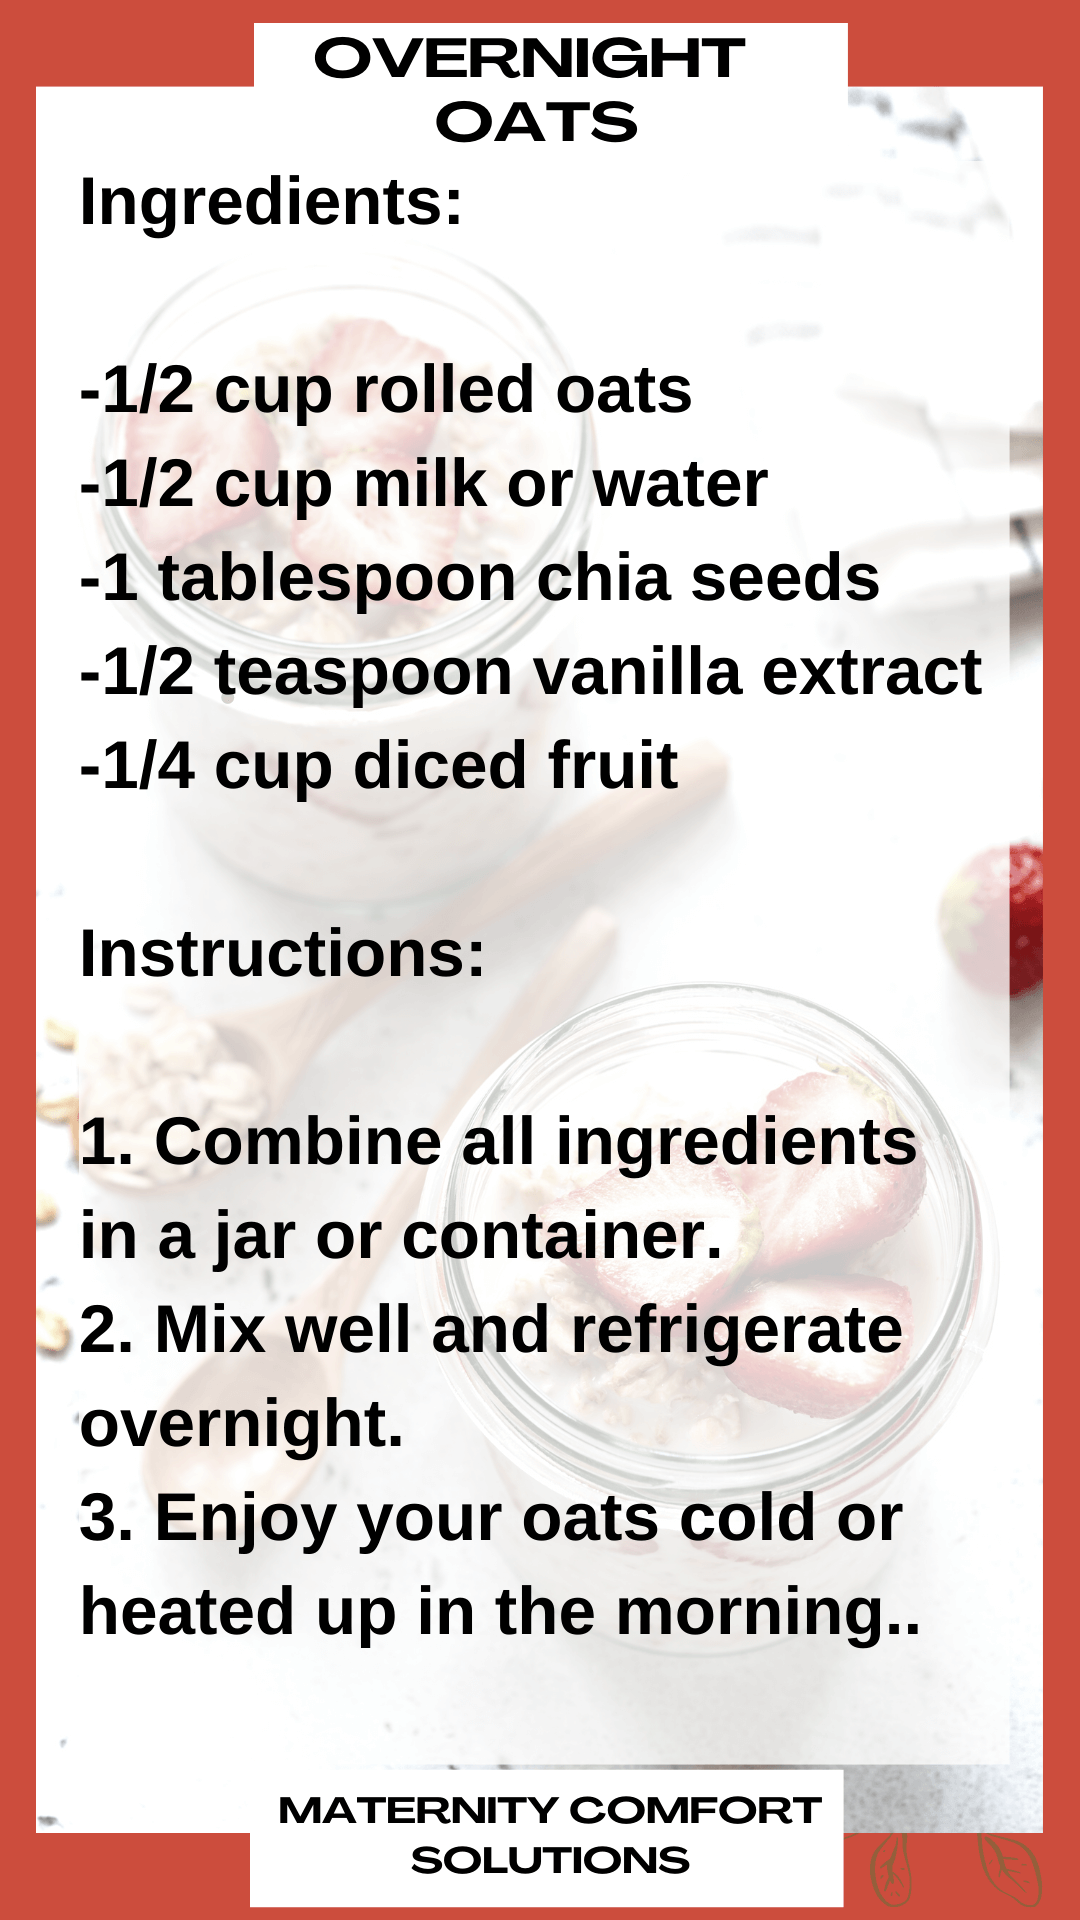 overnight oats recipes safe while pregnant